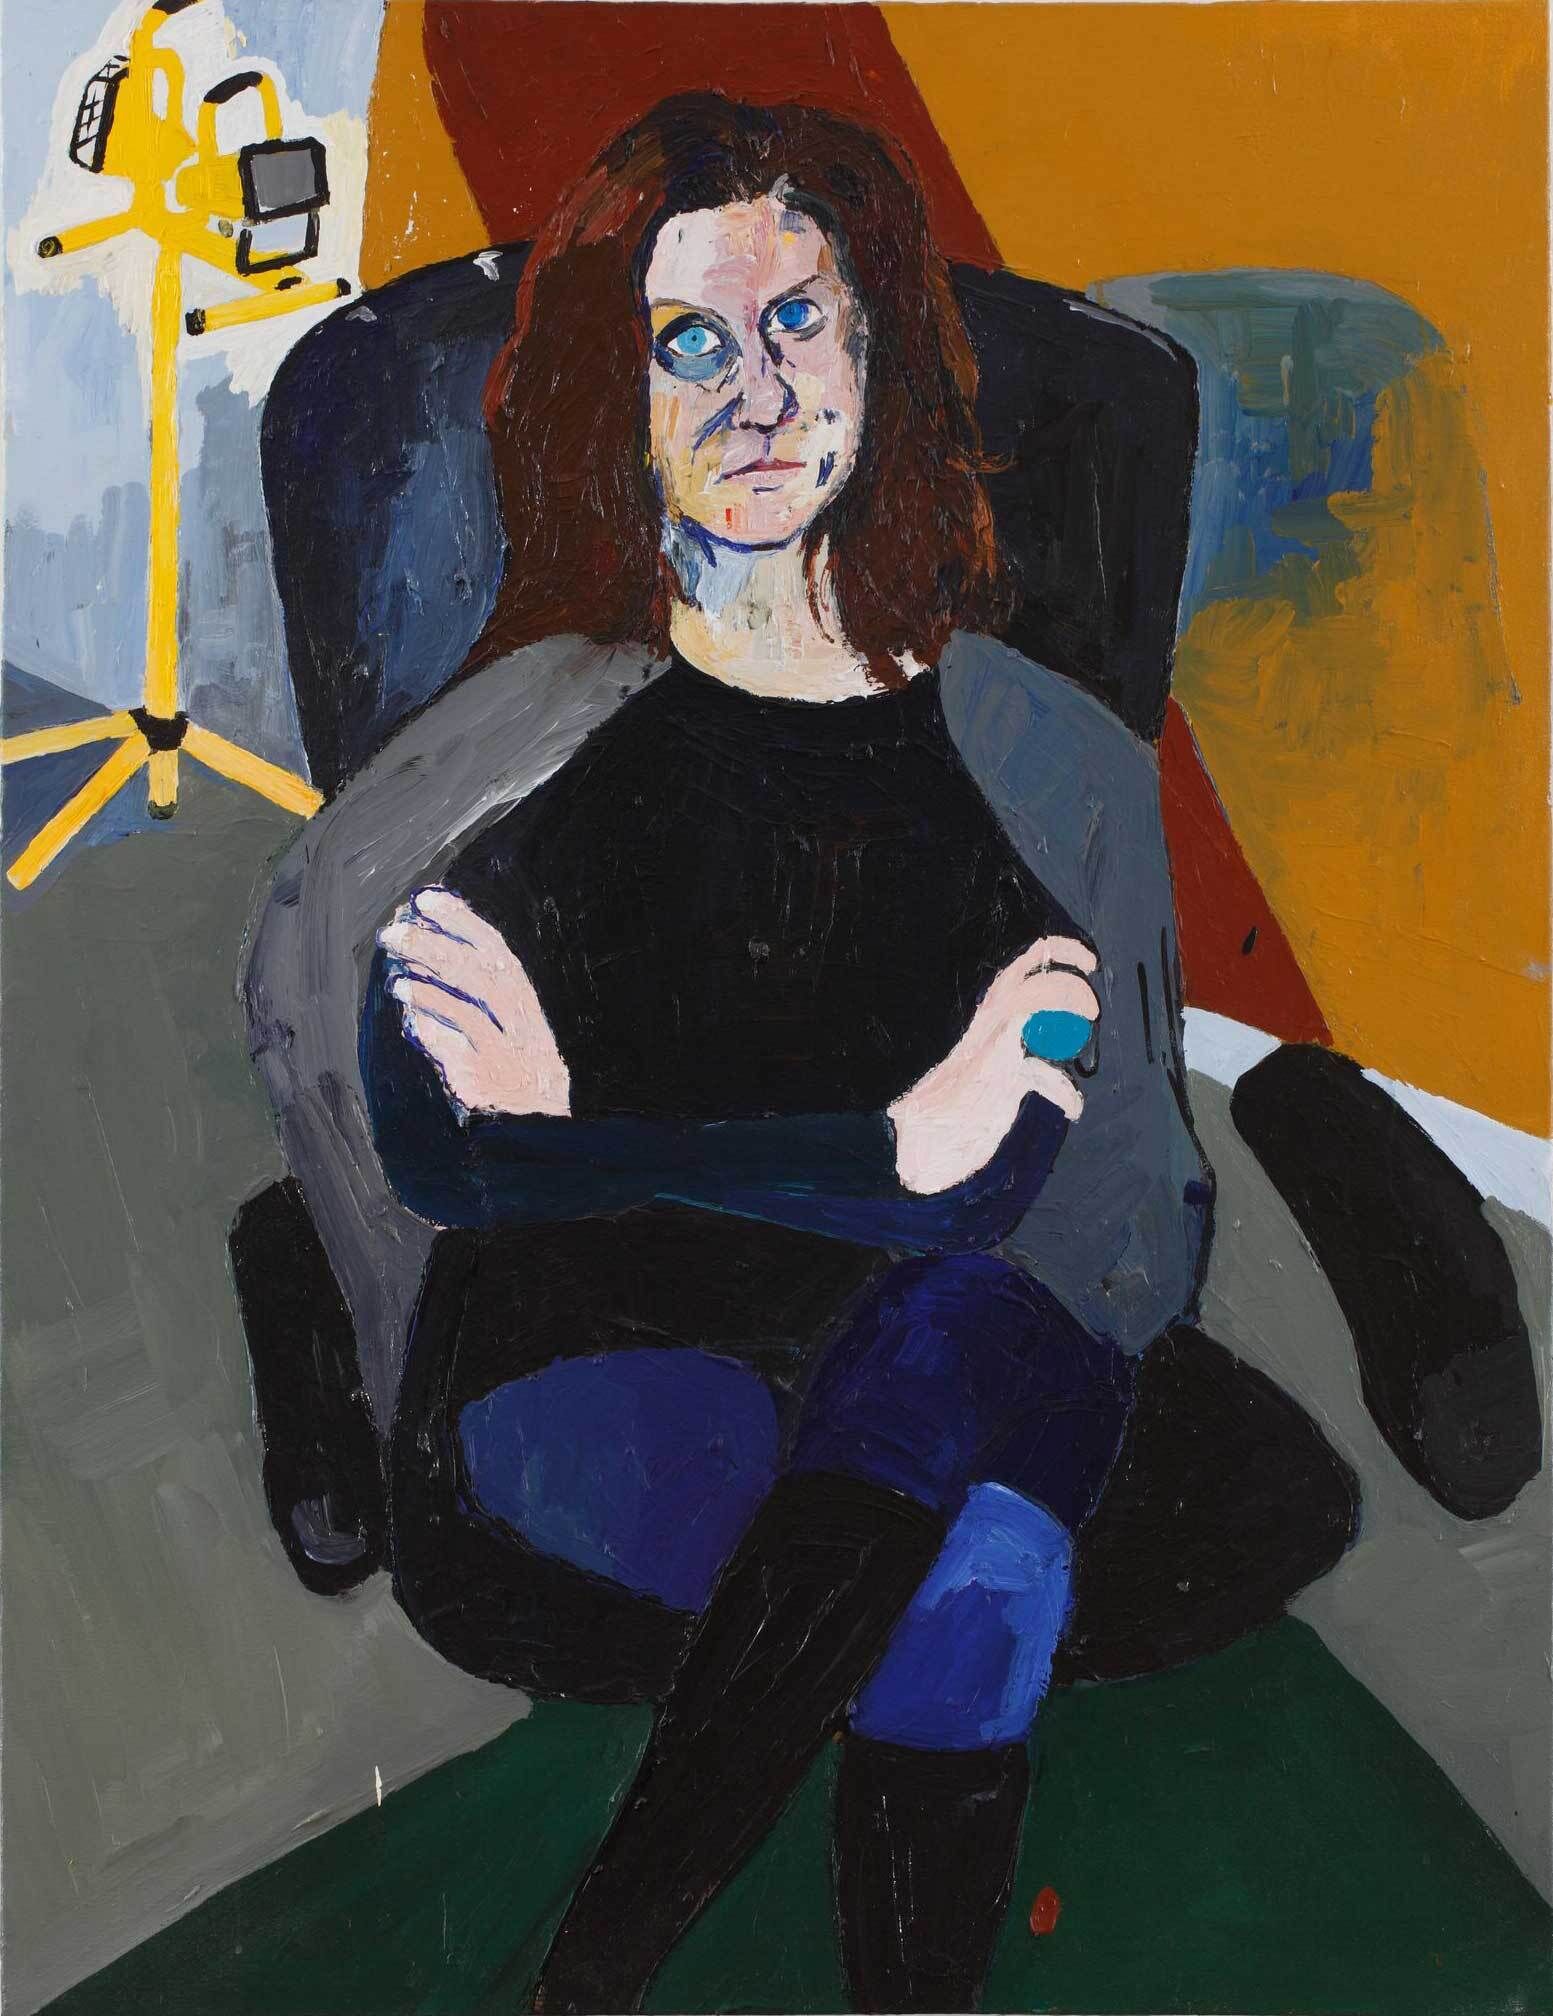 The portrait of a white woman seated with her arms and legs crossed on a rotating desk chair. She has blue eyes, reddish-brown hair, and is wearing a black top, blue jeans, black boots, and a grey jacket draped over her shoulders. She sits in a room with a multicolored wall, grey floors, and a dark green rug. In the background is a tall, yellow work light.